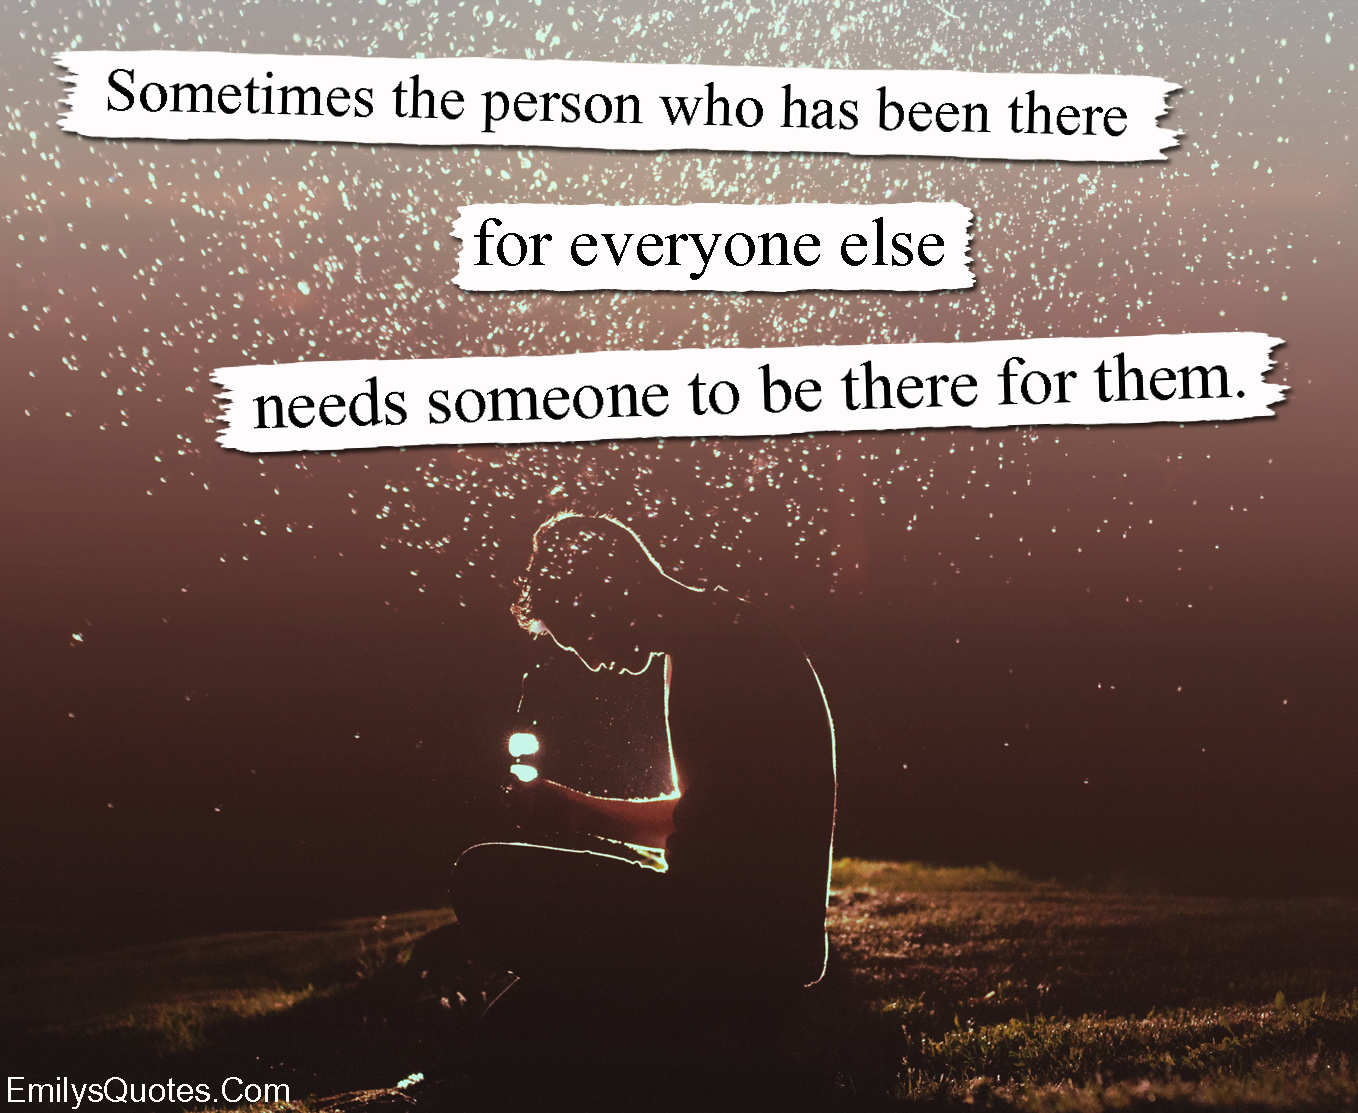 Sometimes the person who has been there for everyone else needs someone to be there for them